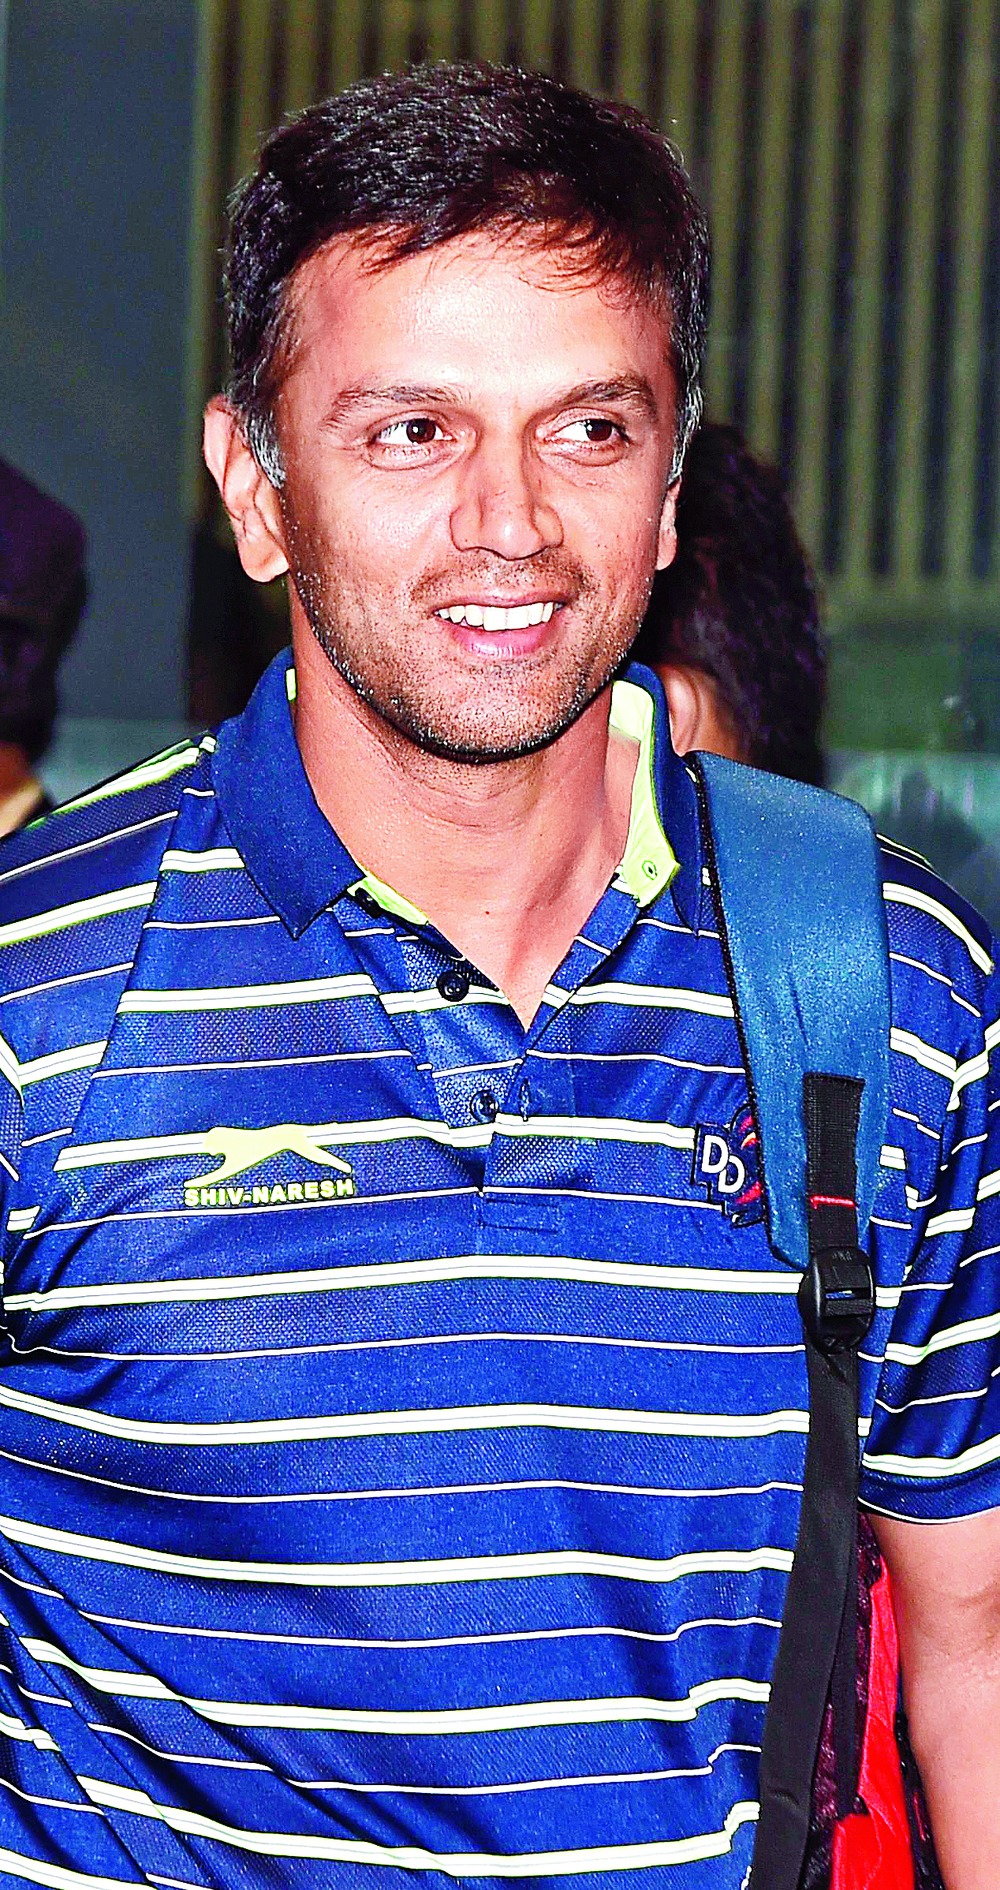 Hope we can fightback and play better cricket Rahul Dravid